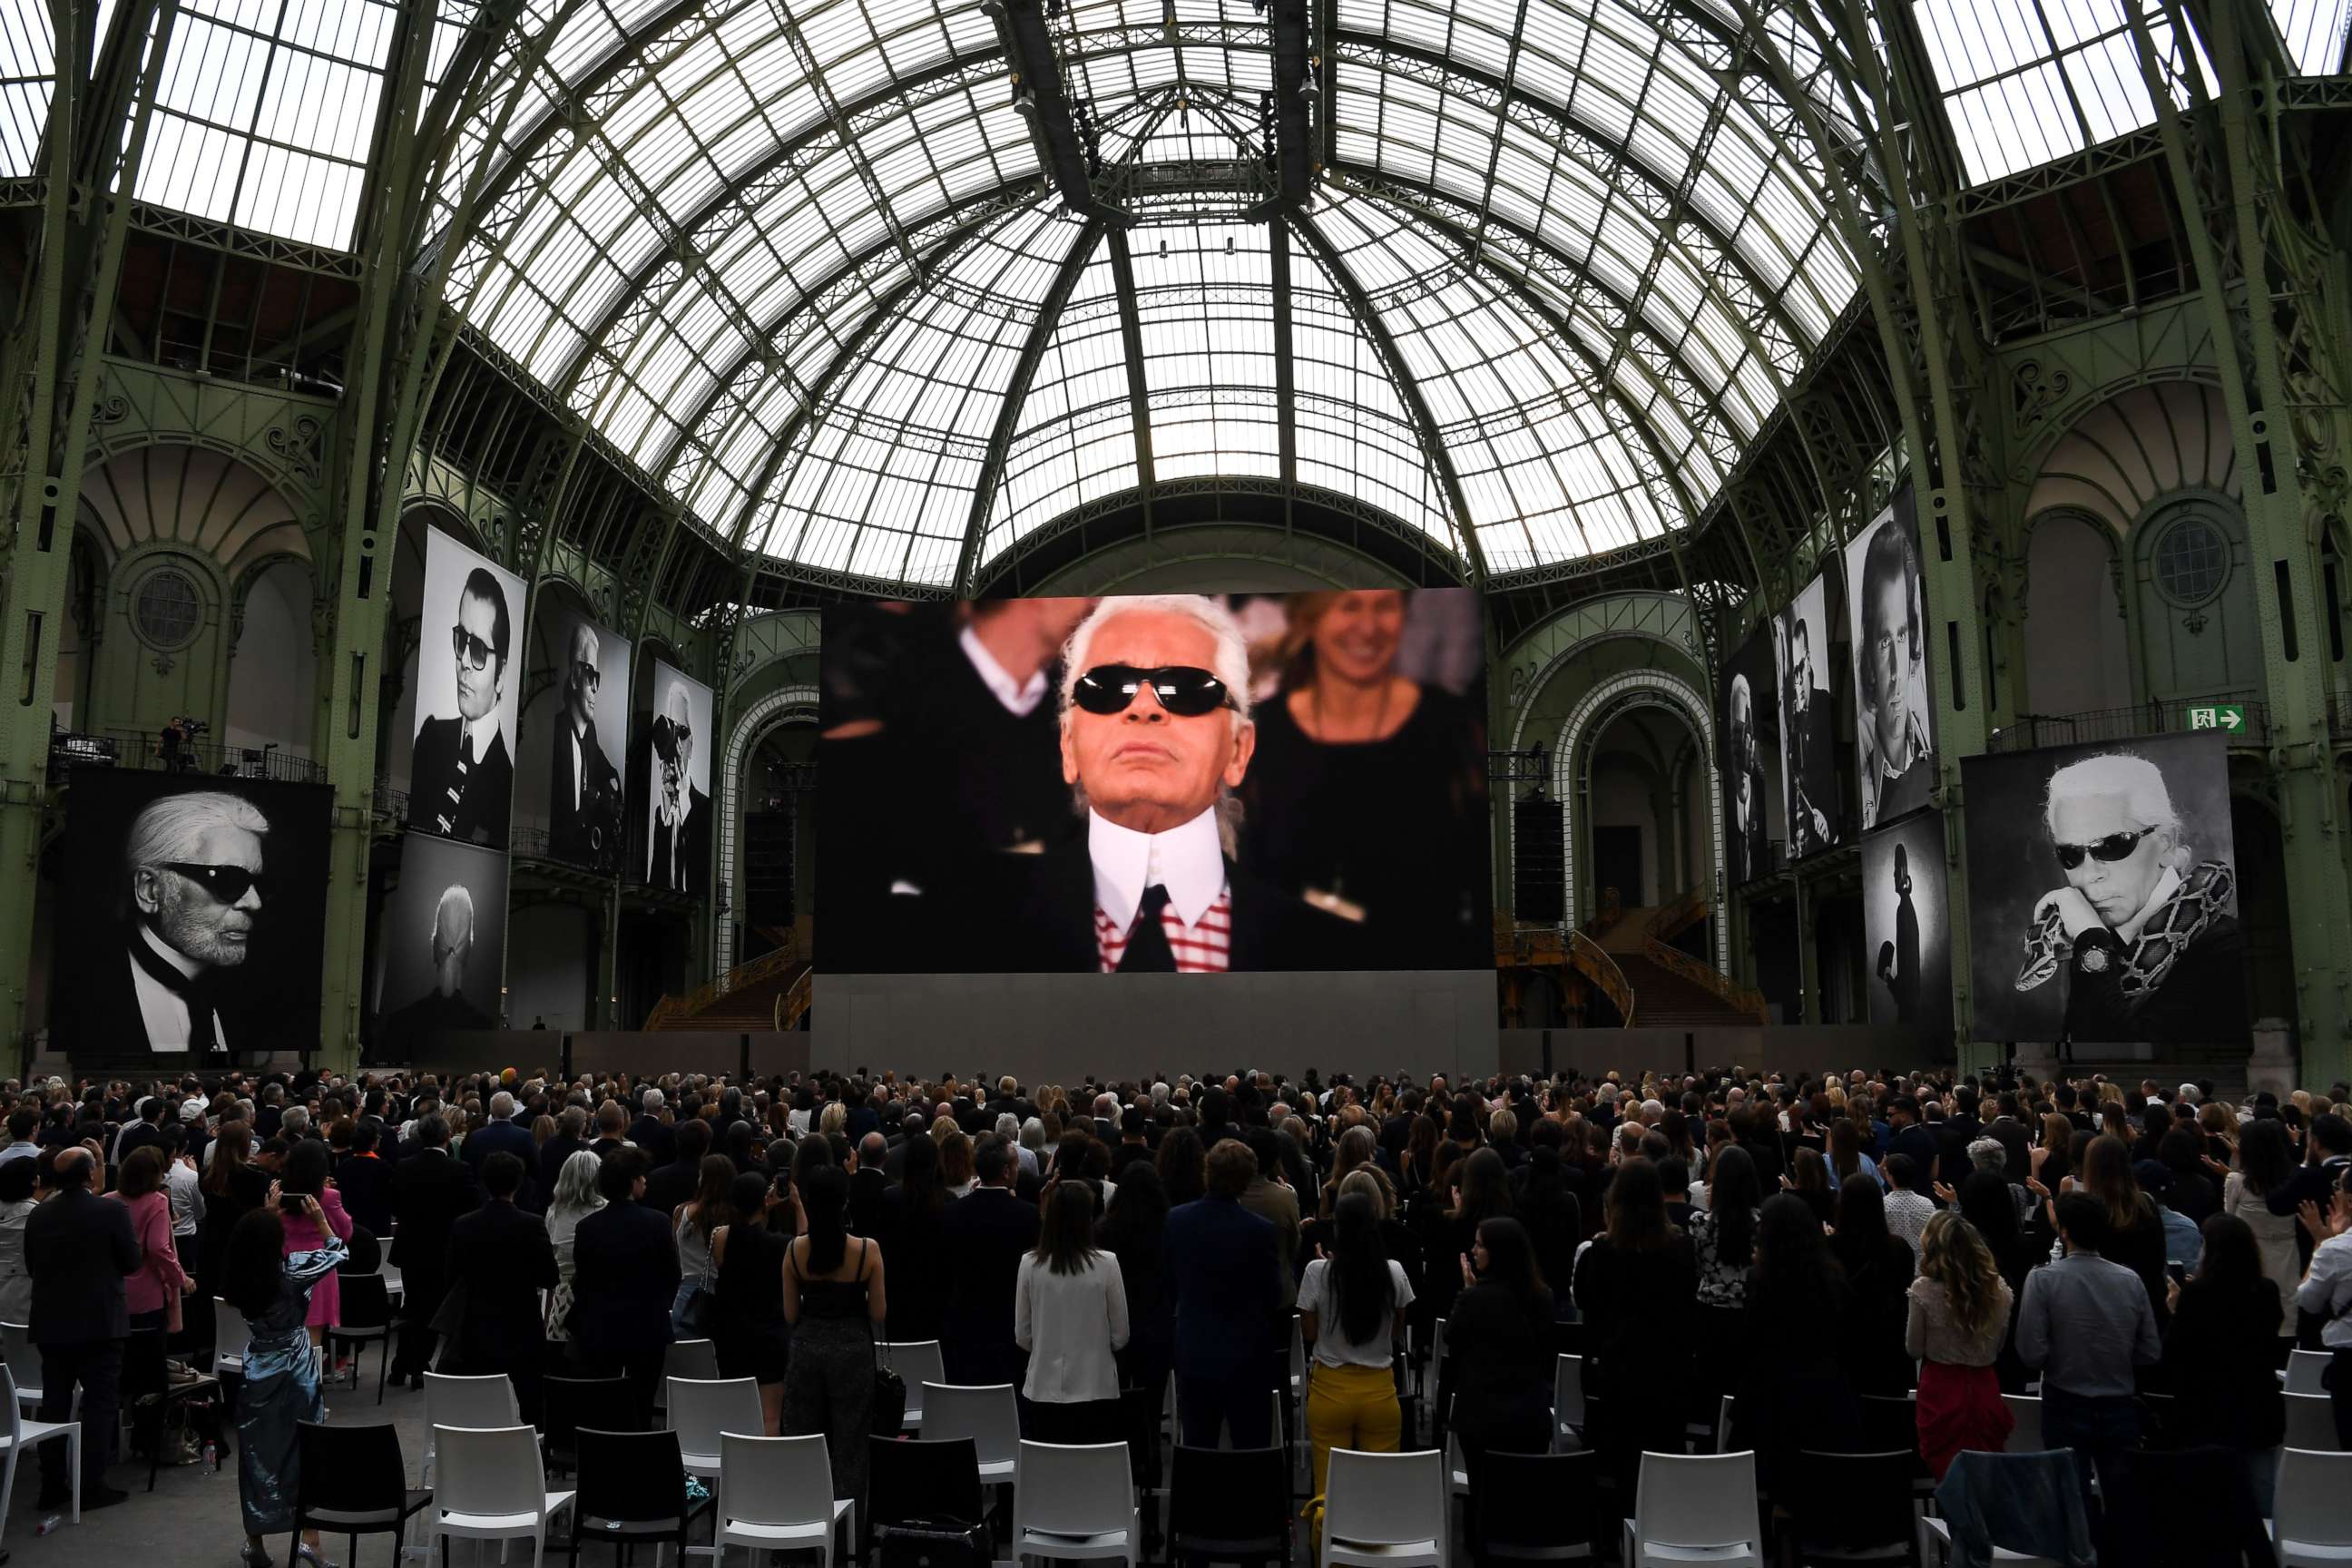 PHOTO: People attend an event to honor the late German fashion designer Karl Lagerfeld at the Grand Palais in Paris, June 20, 2019.